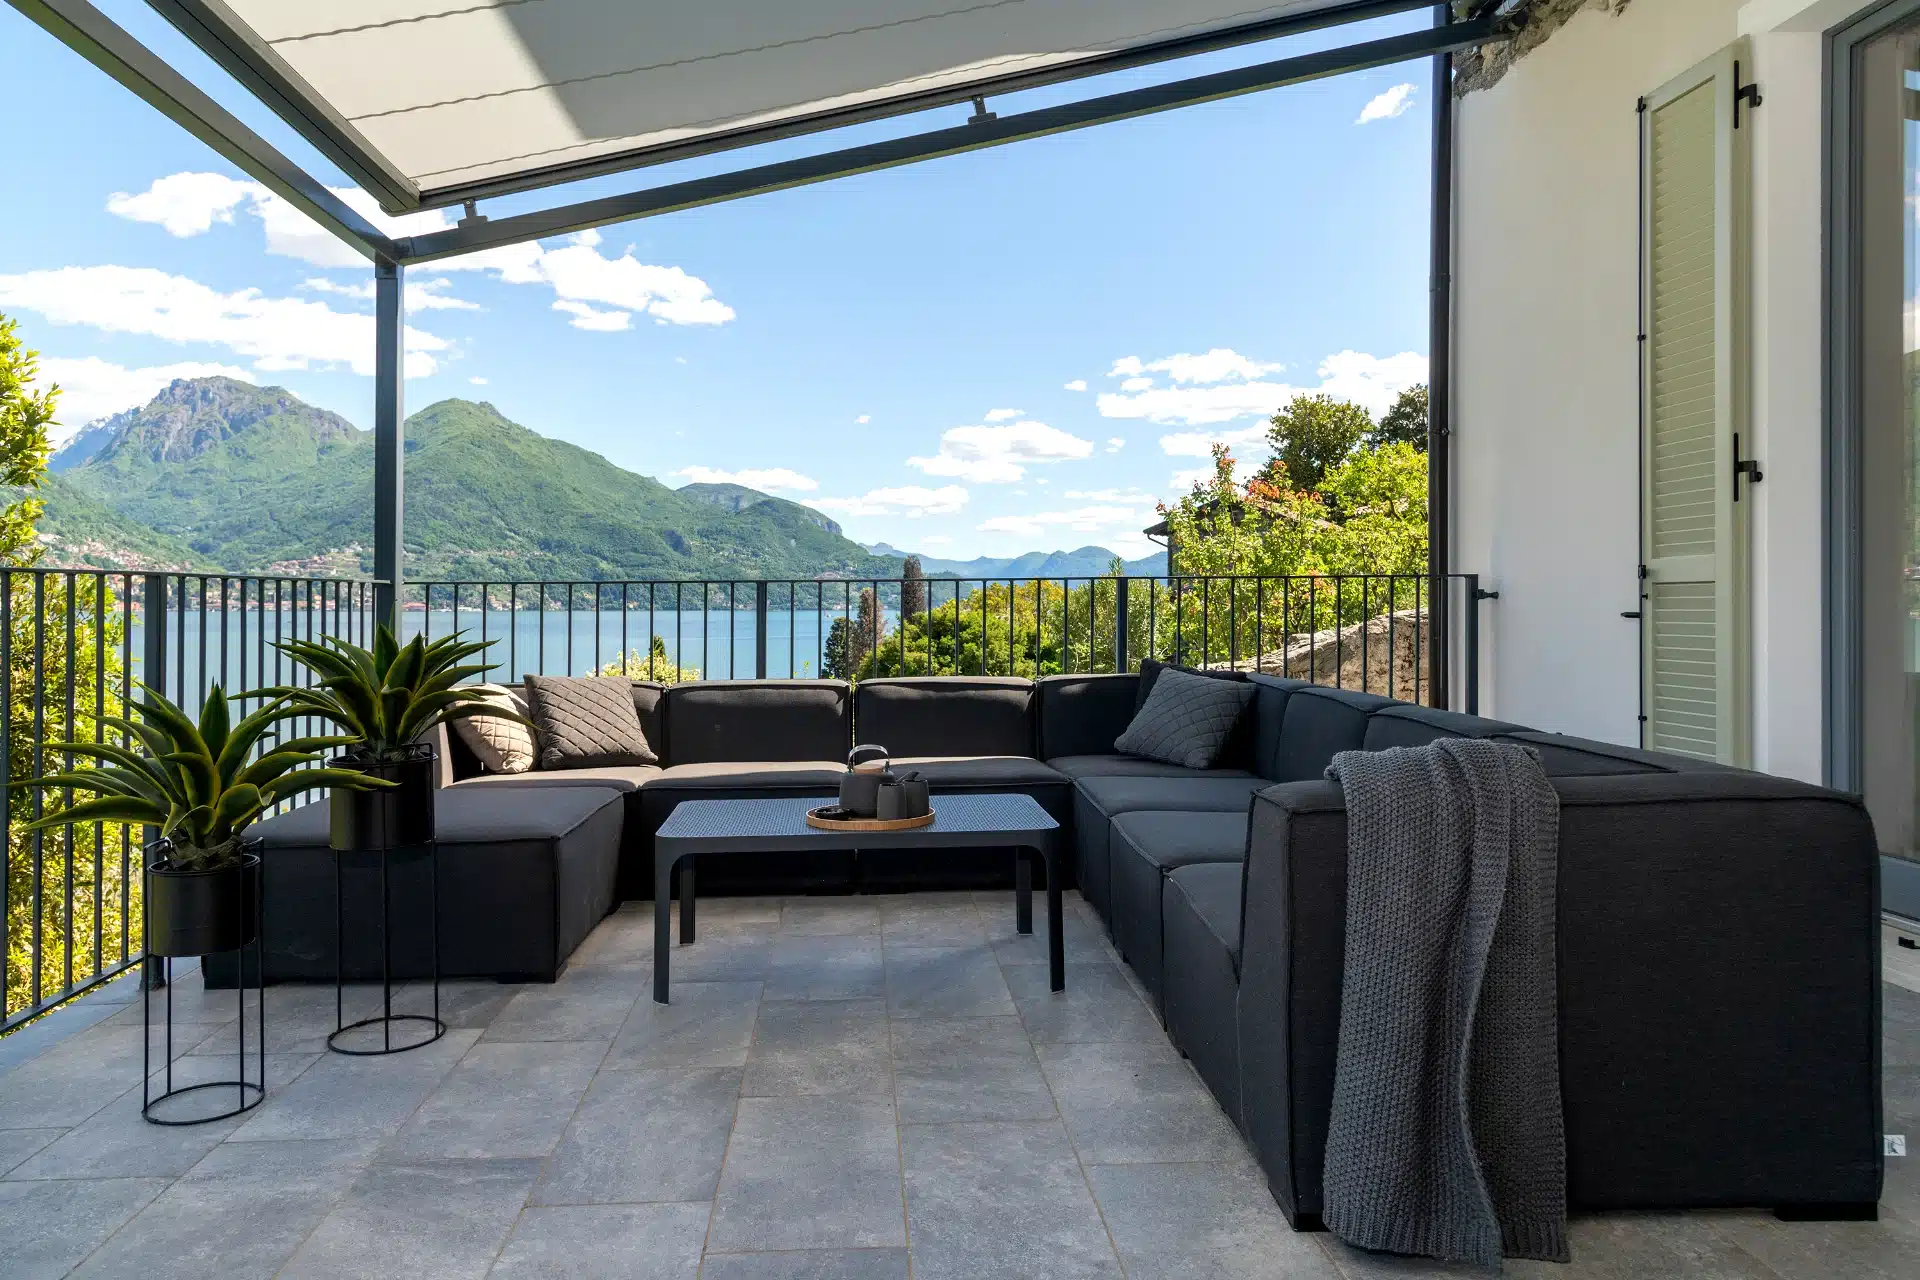 Luxury Villa in Lake Como, fundraiser auction items, live auction items